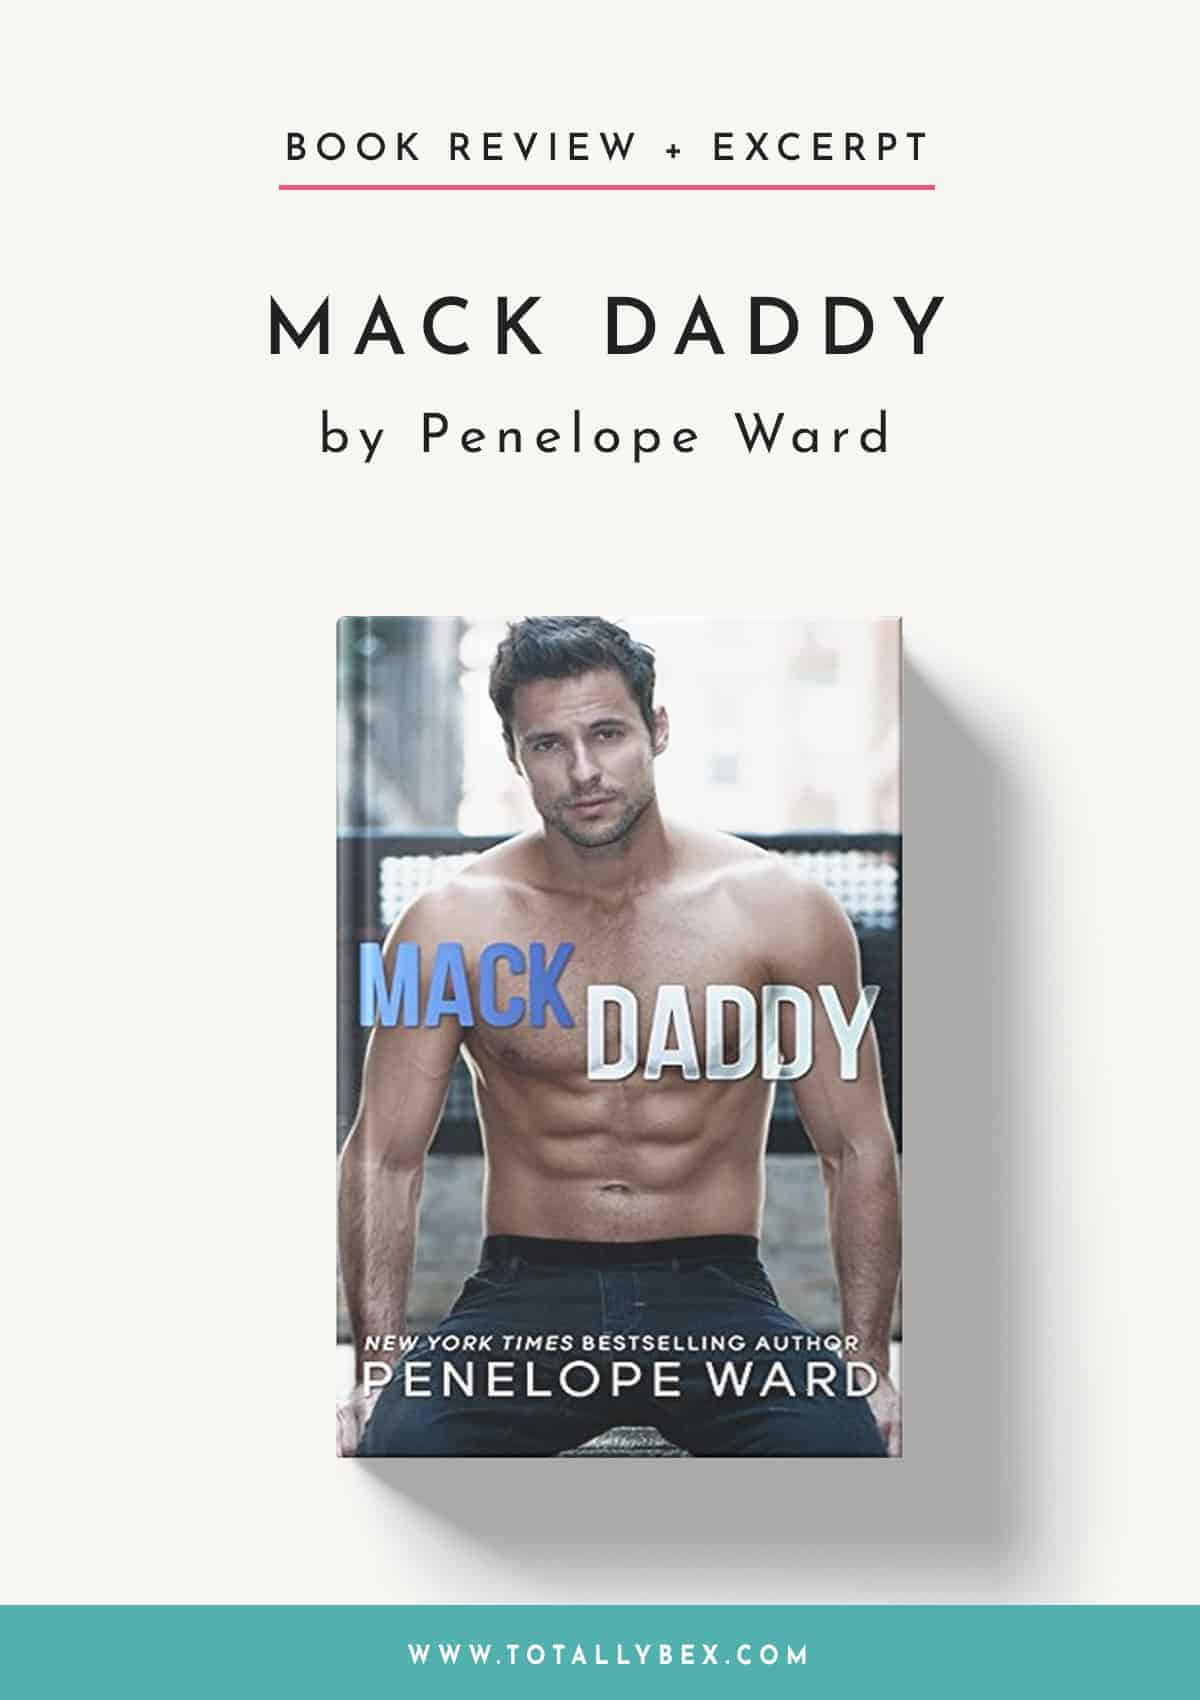 Mack Daddy by Penelope Ward-Book Review+Excerpt